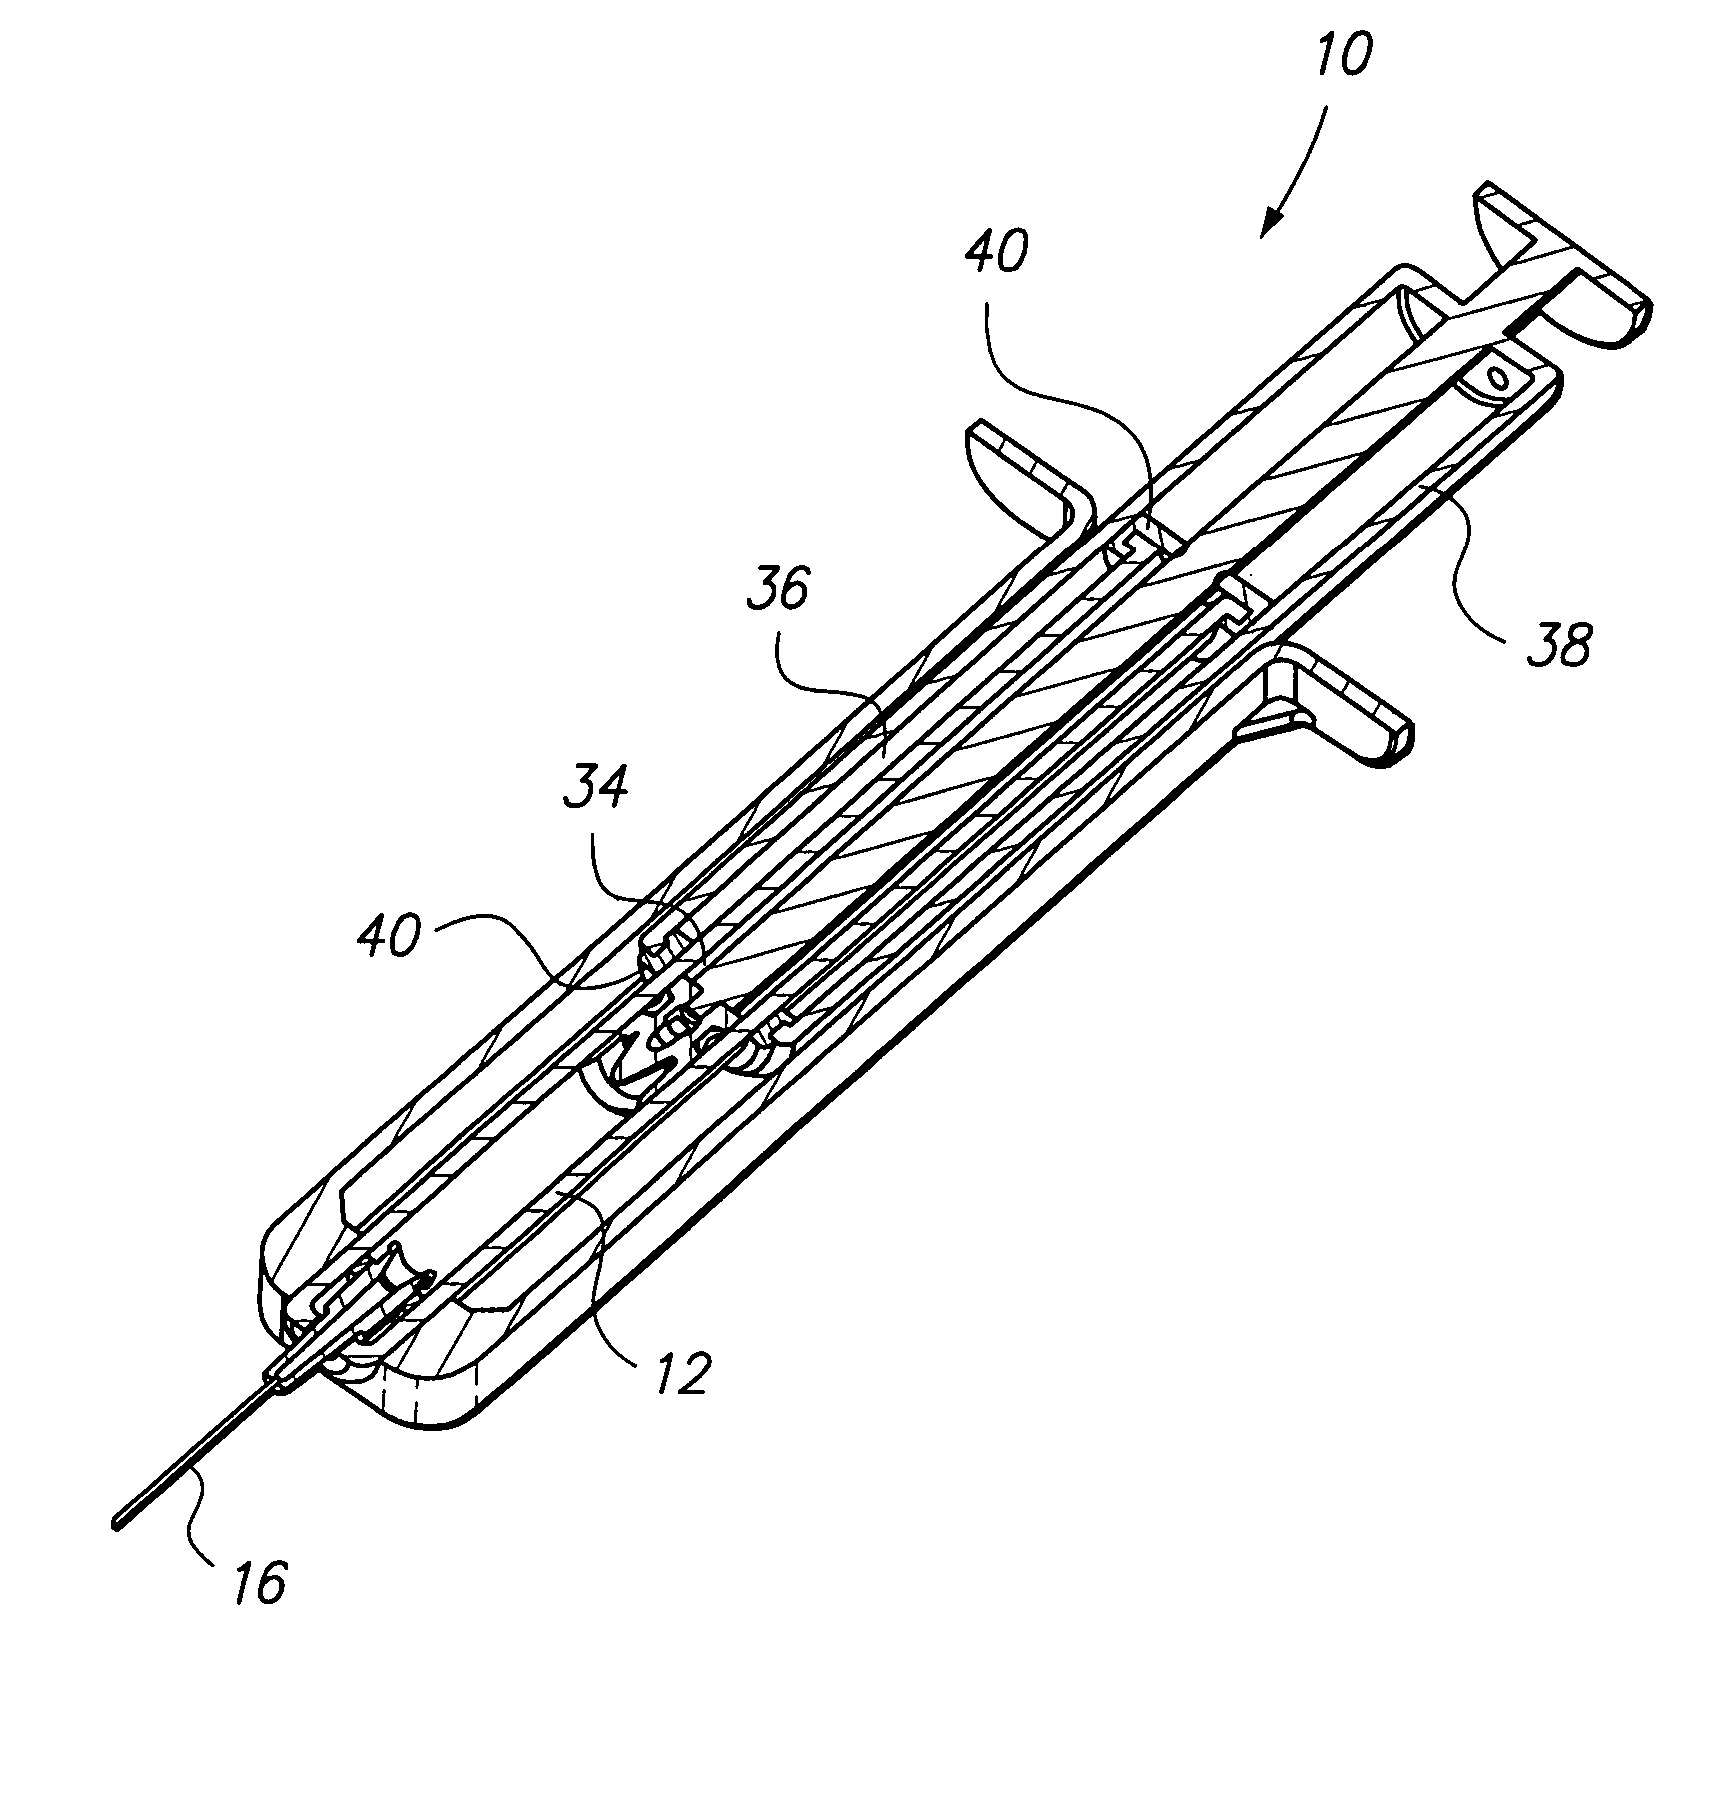 Small volume syringe with writing portion